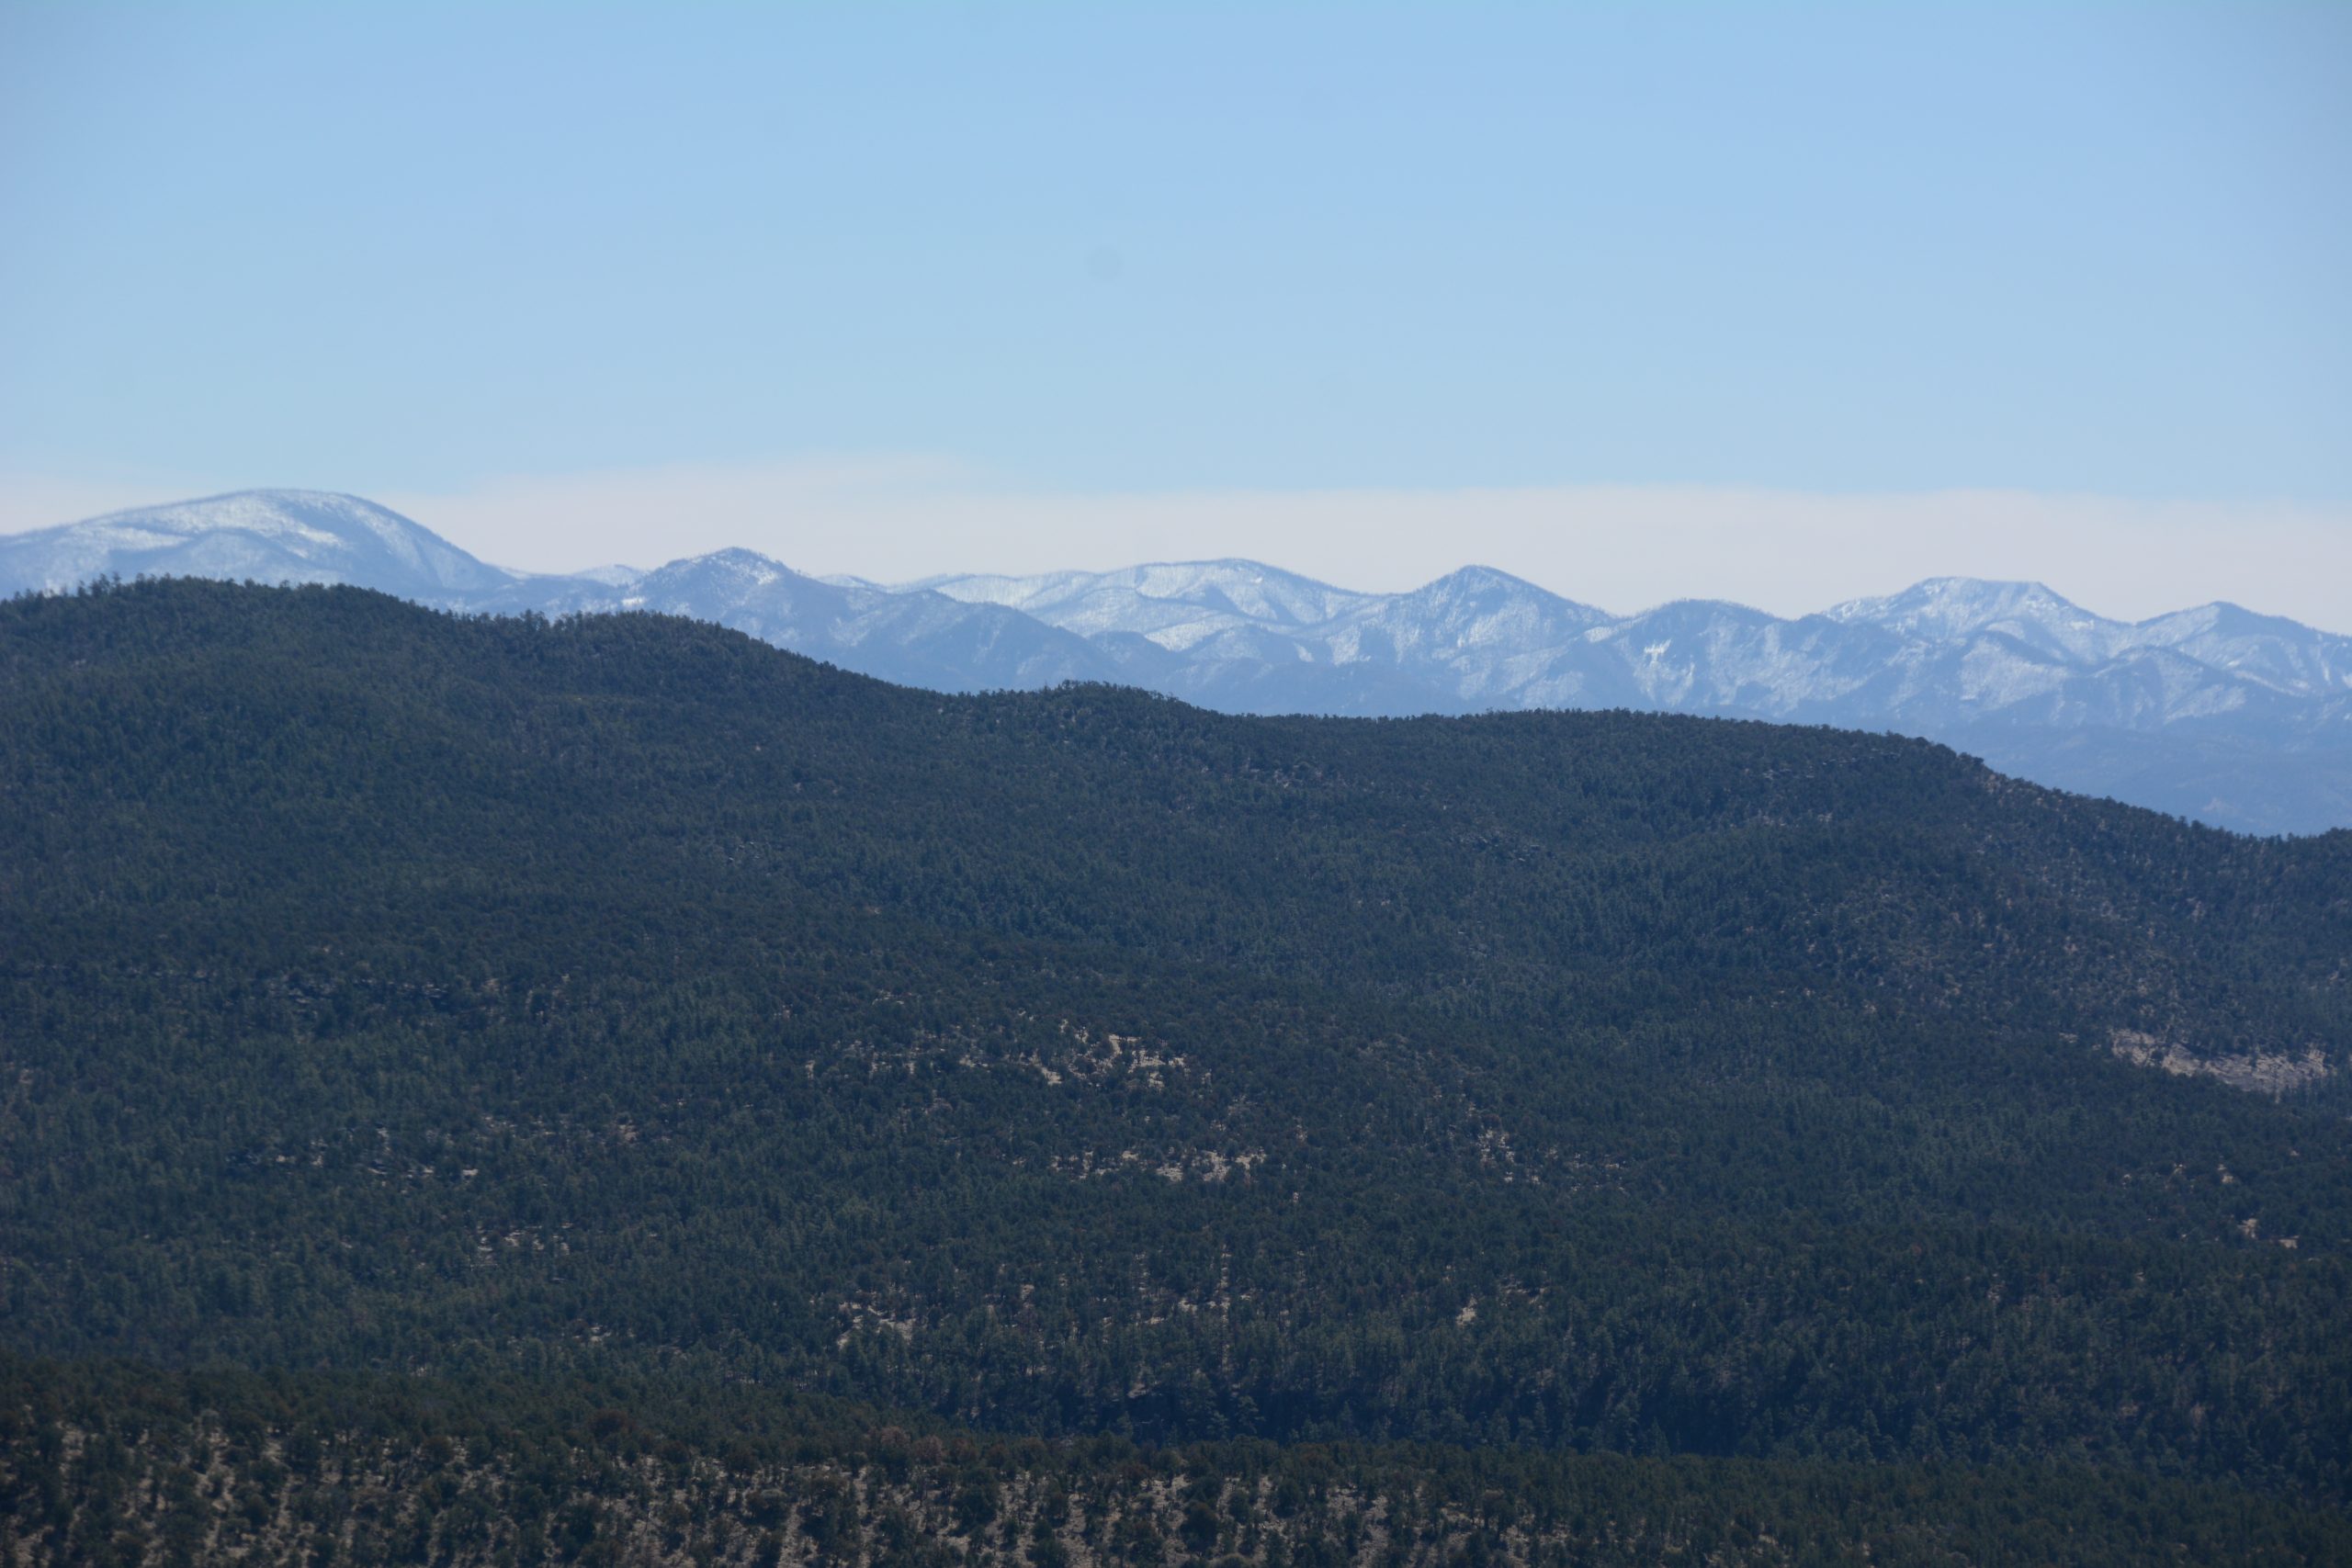 Looking across the Blue Range Wilderness towards the snow-capped mountains within the Gila Wilderness. (Photo George Wuerthner)